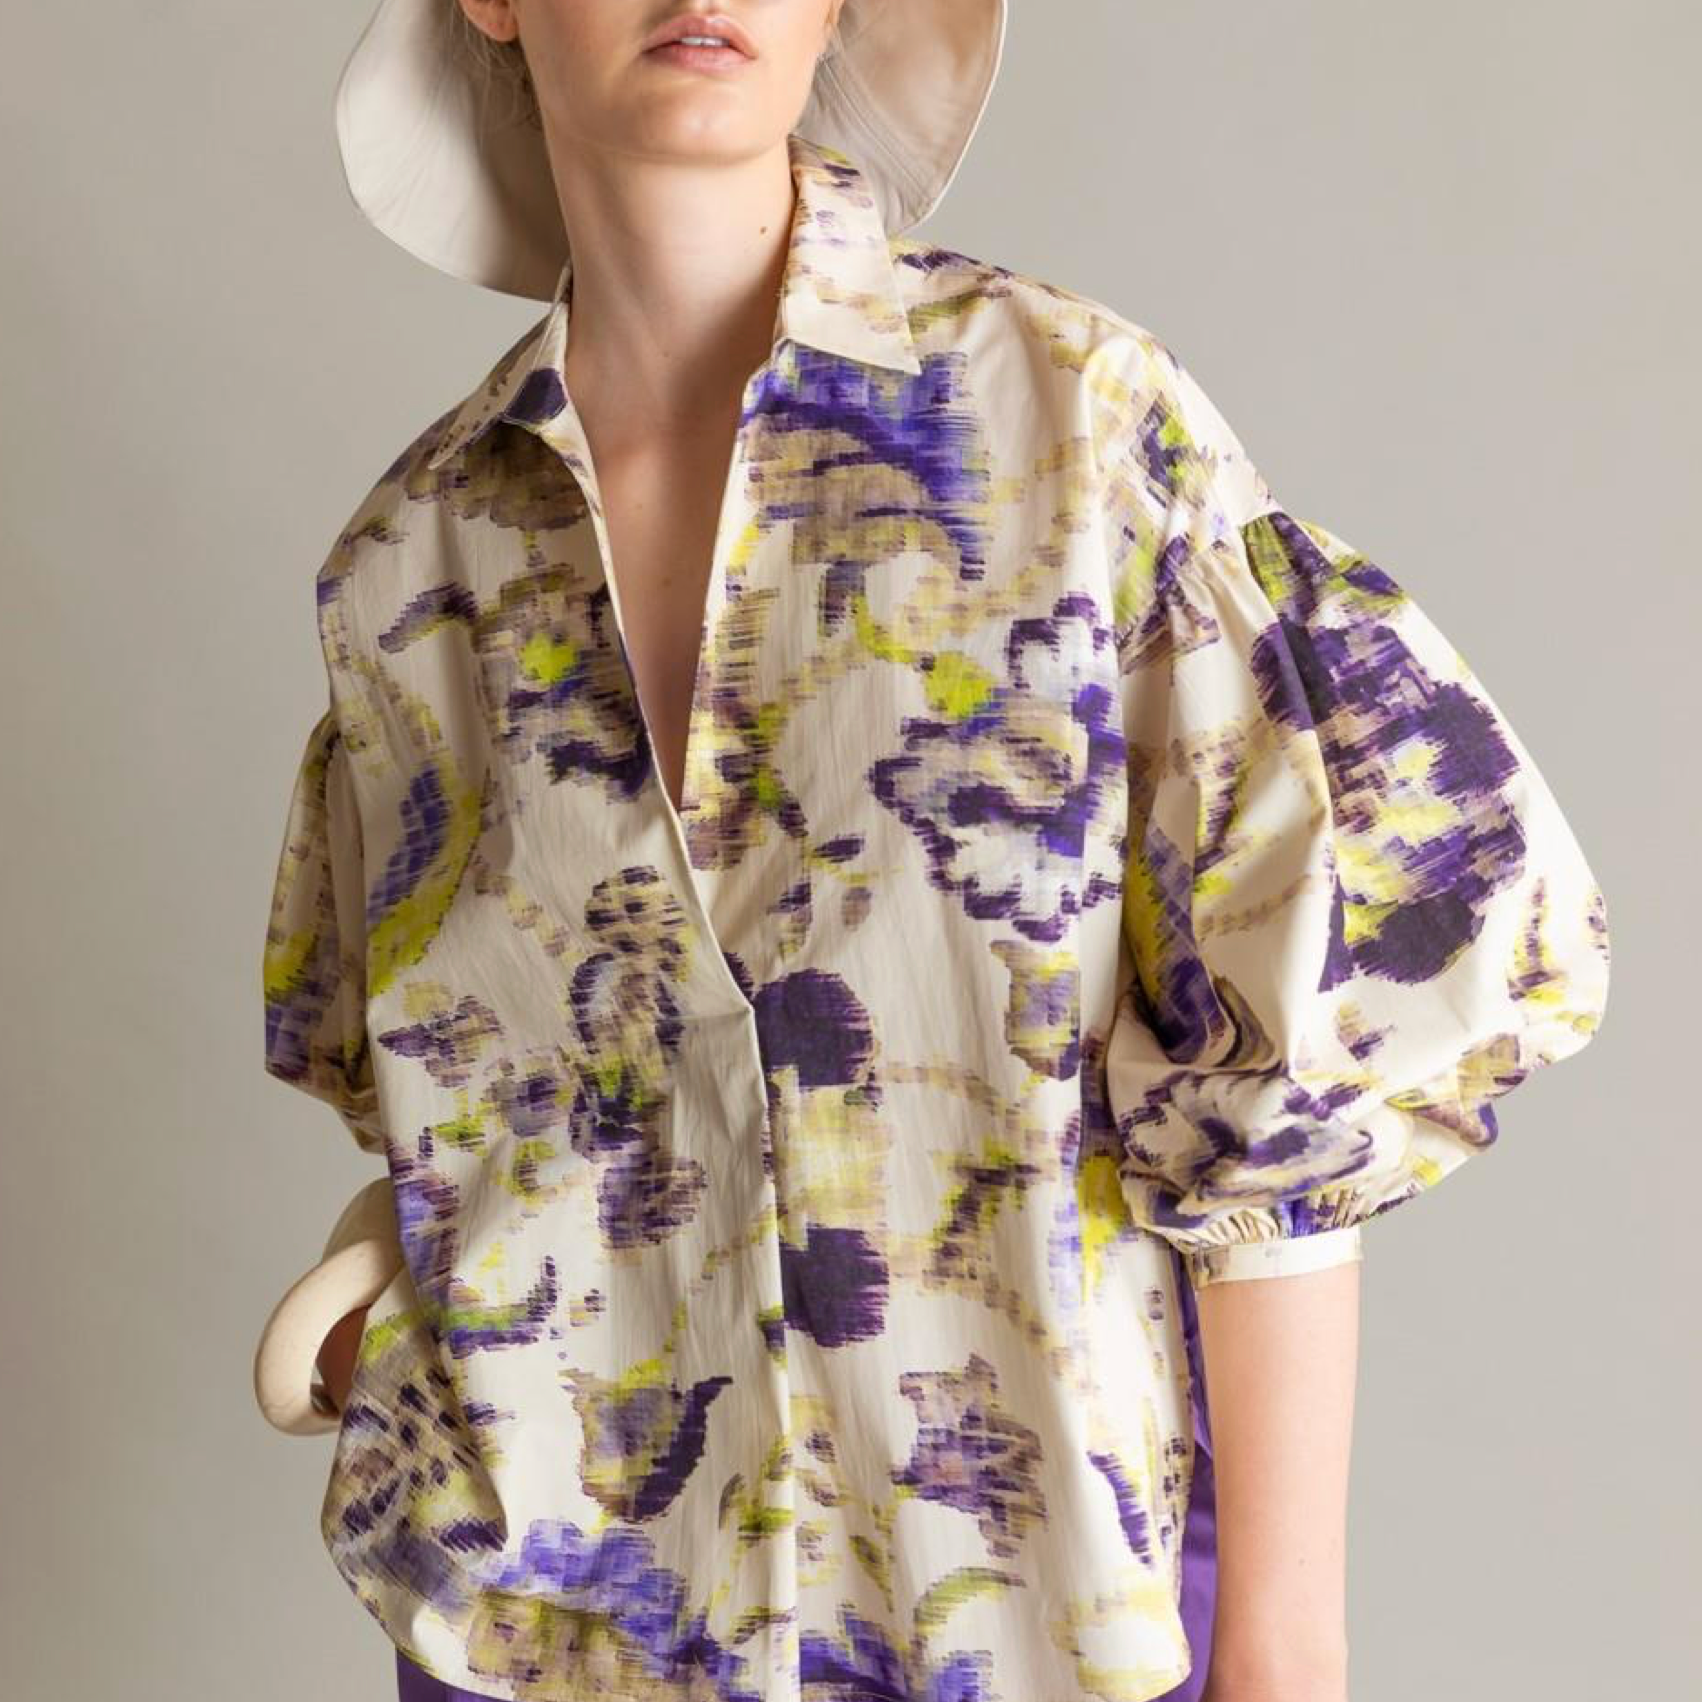 Discover the perfect blend of comfort and style with our 'Psophia' Poplin Floral Print Blouse. This over-sized blouse, designed in Spain, offers effortless elegance and a flattering fit. Make a statement with its bold floral print and stand out in any occasion.